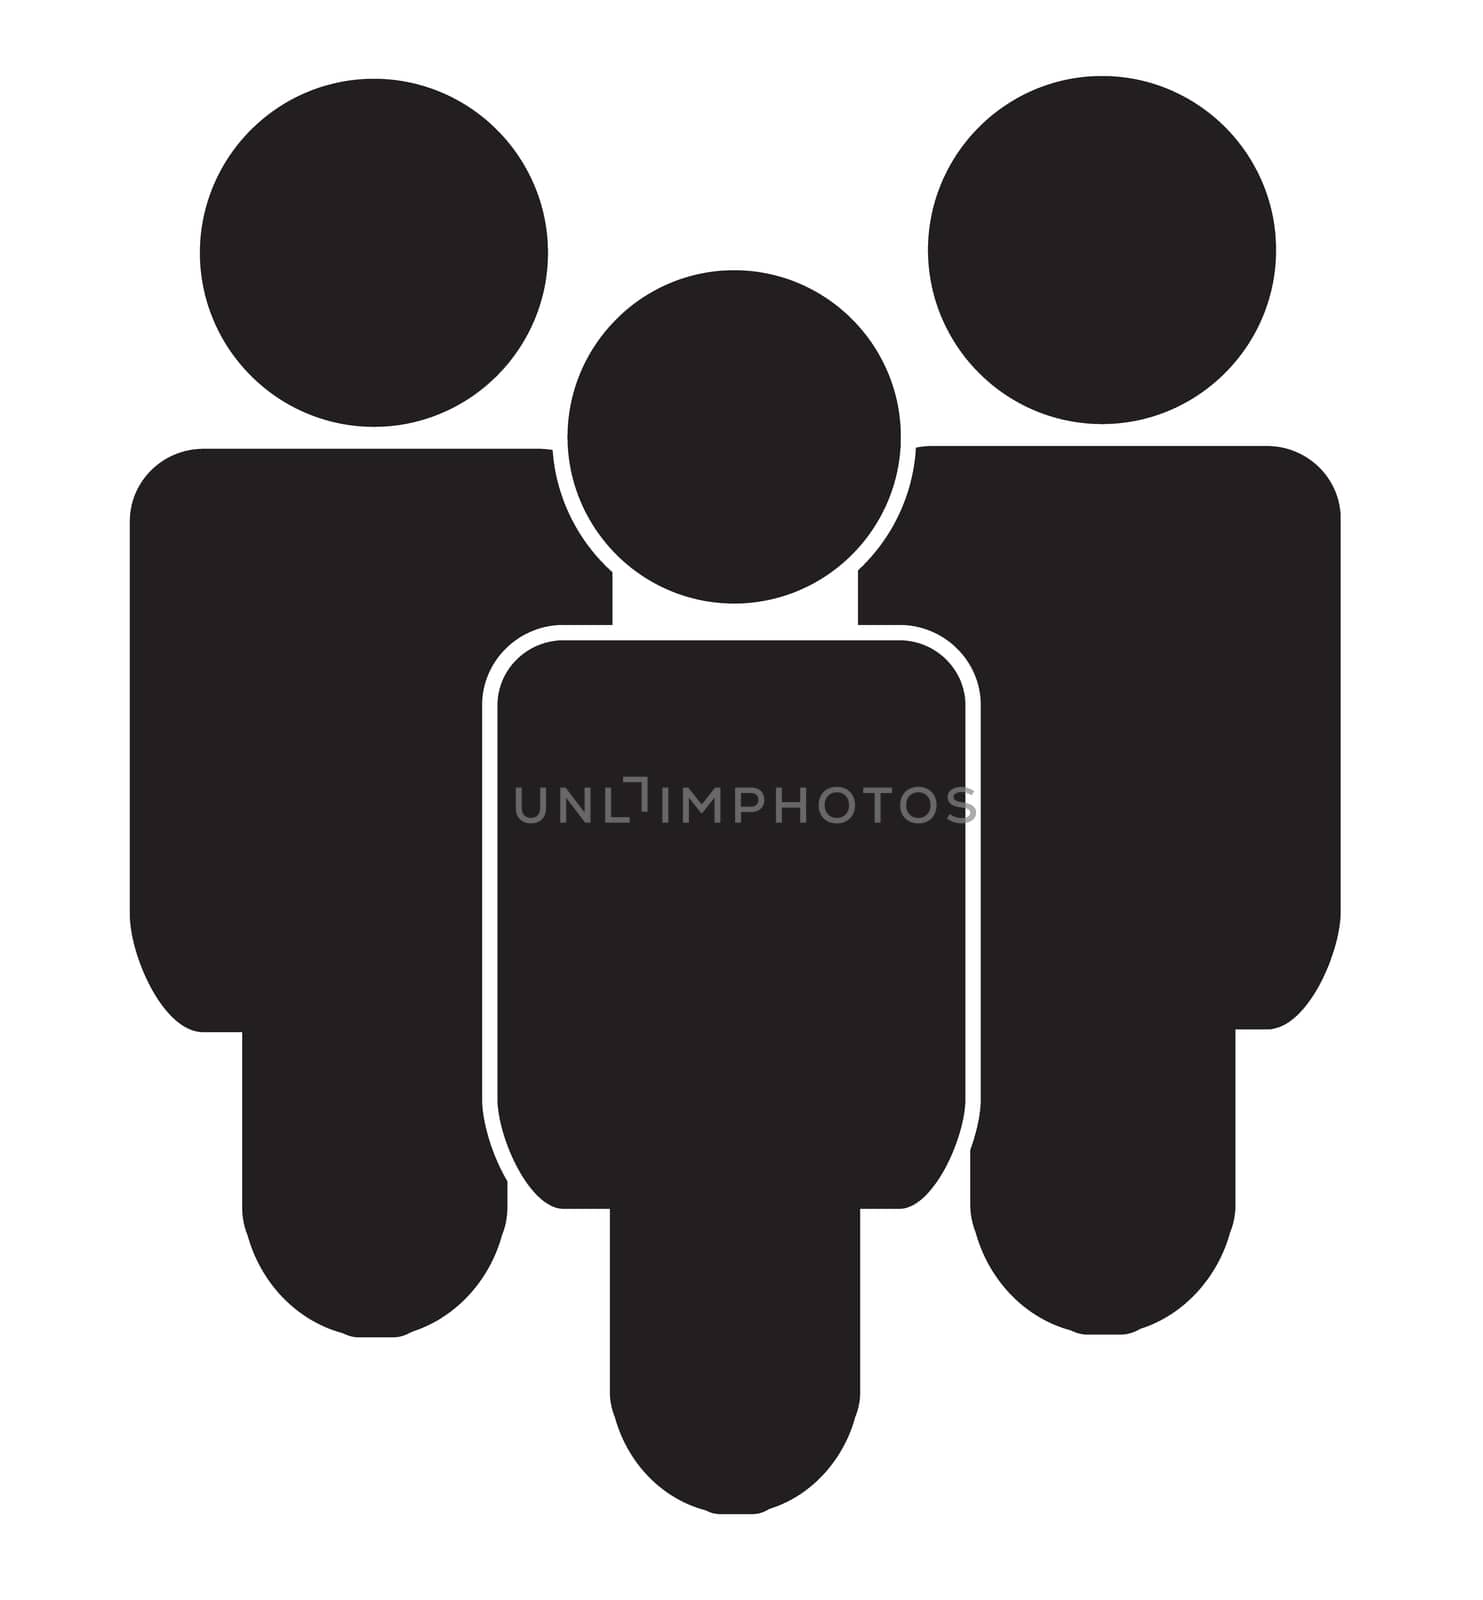 Gray Group People icon isolated. Modern simple flat team male si by suthee